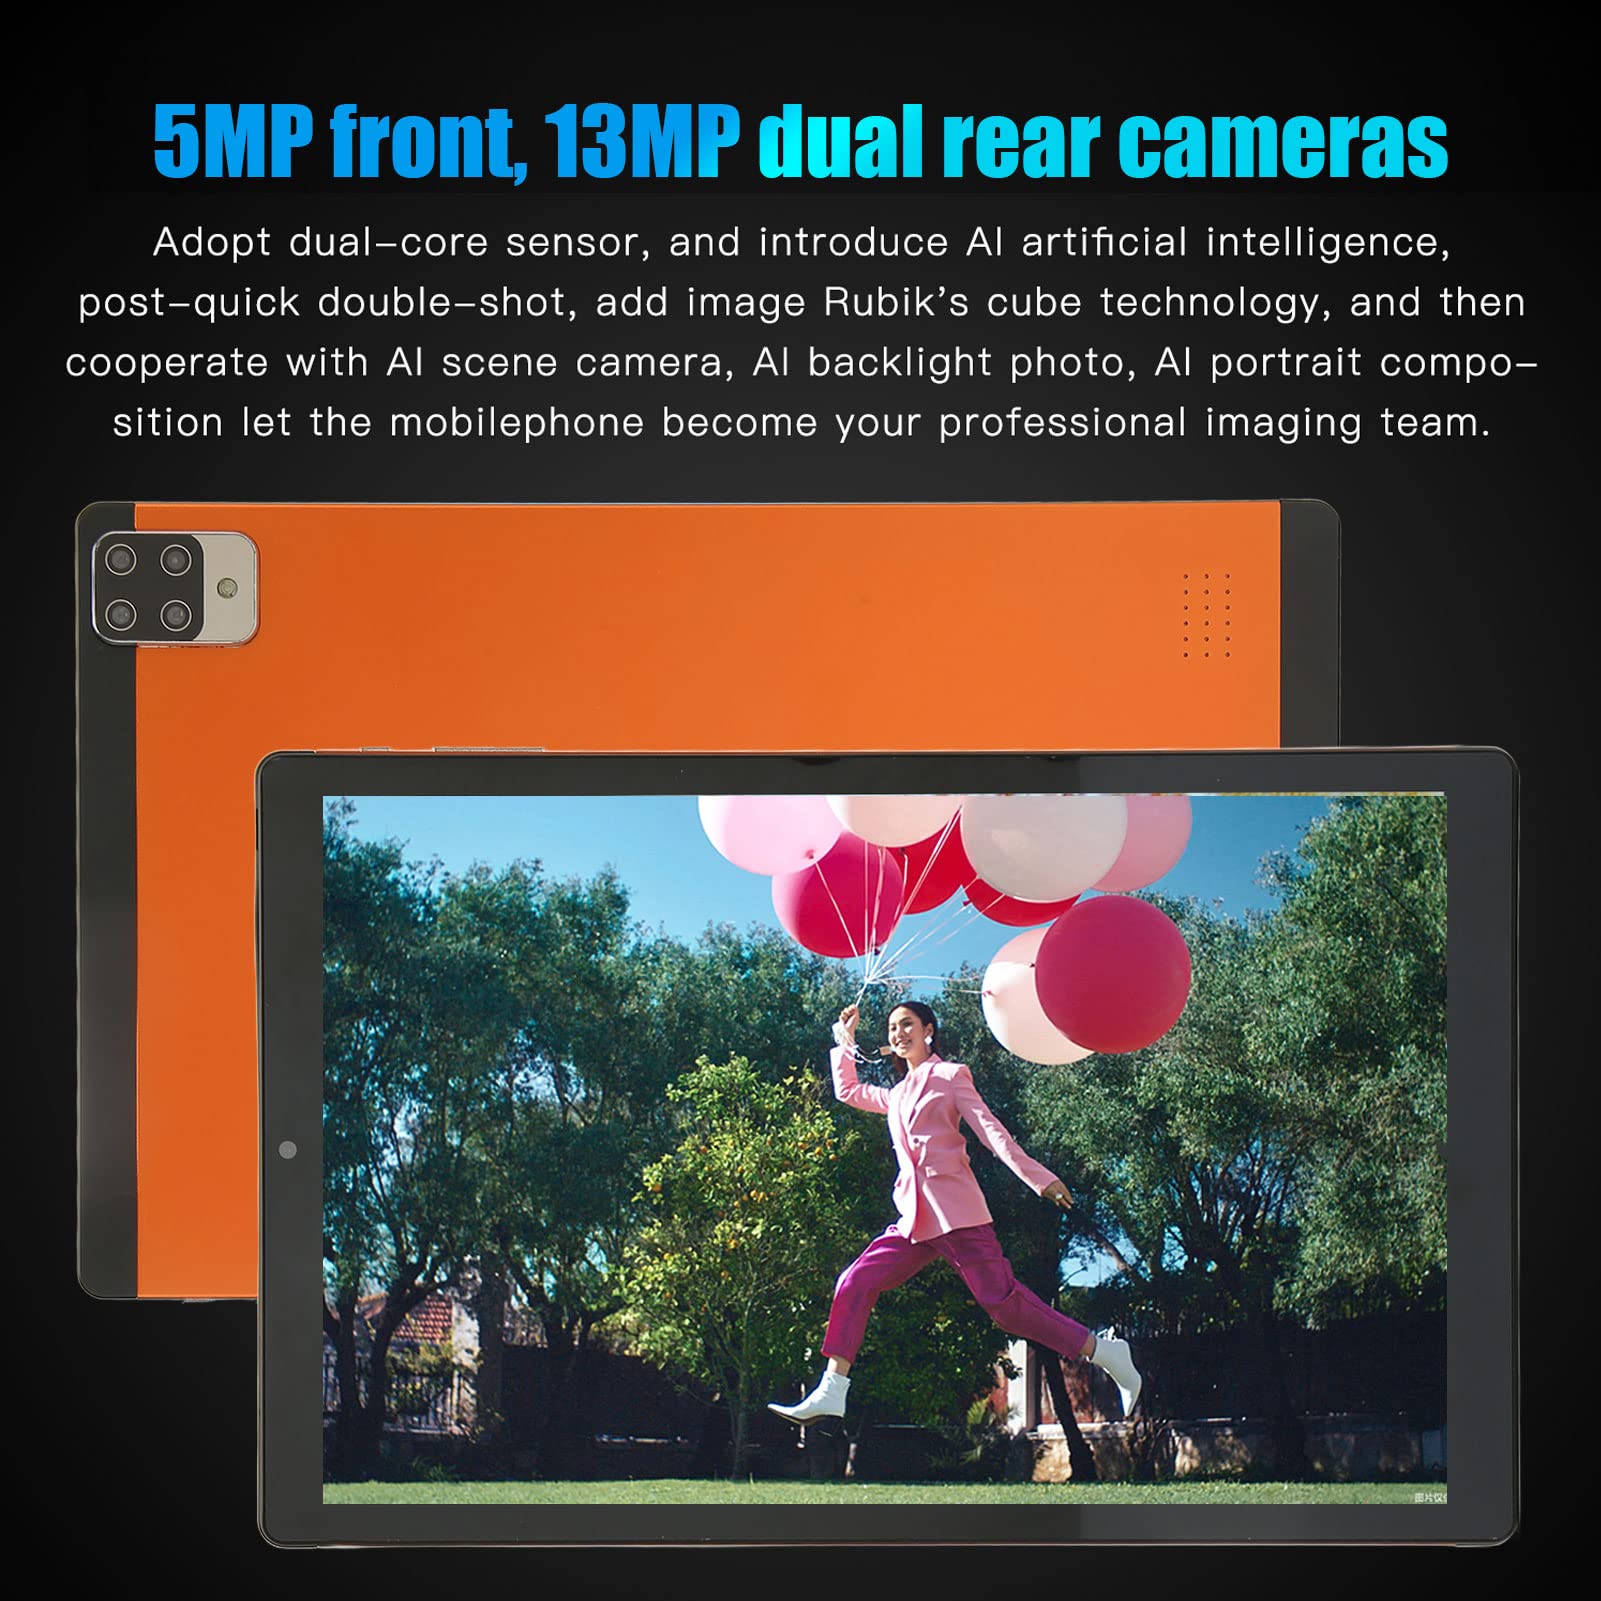 10.1in Tablet, PC Tablet for 11.0 6GB 128GB 2.4G 5G WiFi, 1920x1080 IPS Front 5MP Rear 13MP Calling Tablet 100‑240V Orange